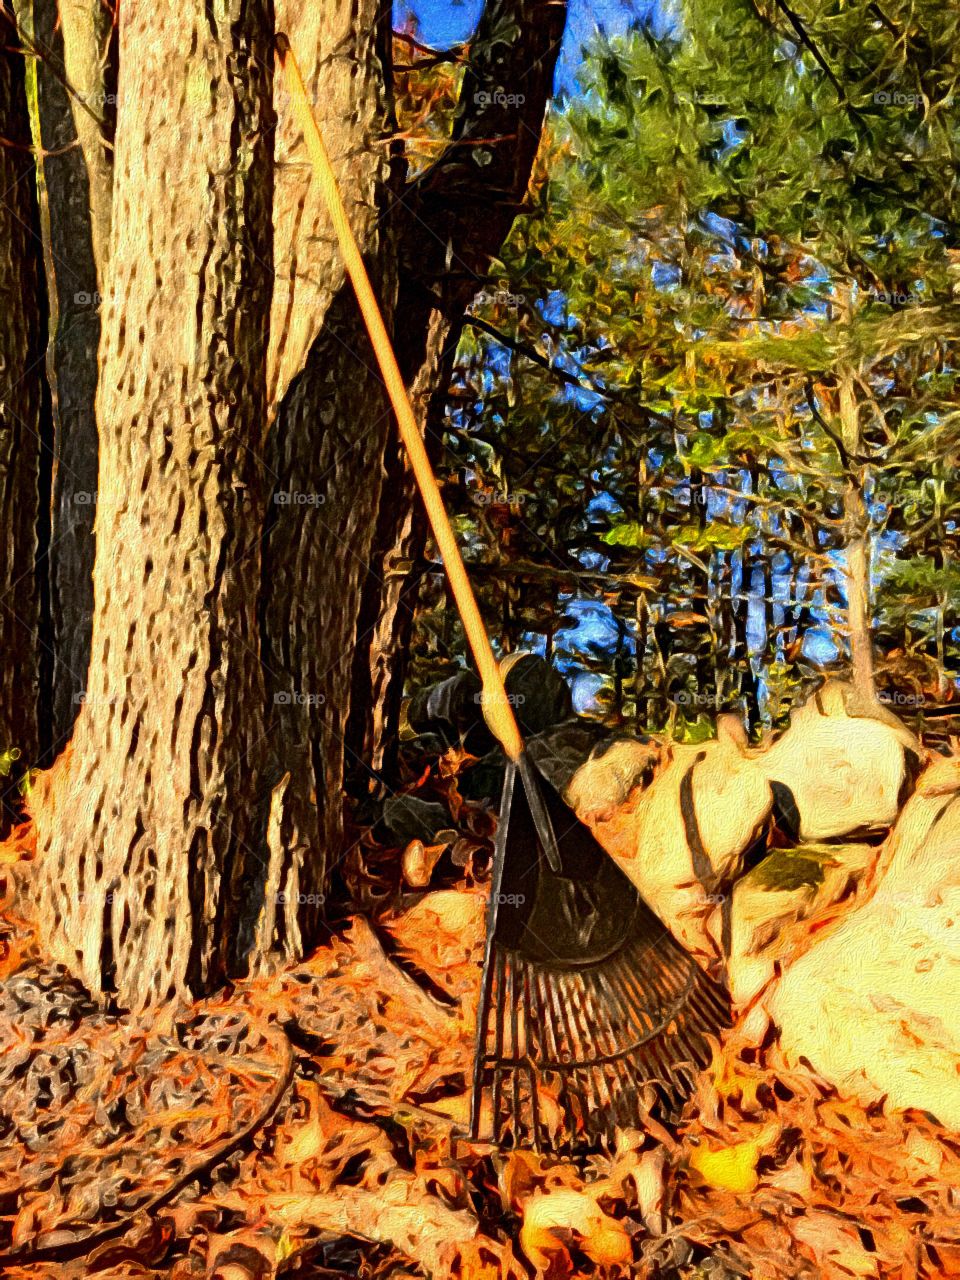 Raking the leaves. This picture was enhanced with brush stroke iPhone app which makes photographs look like paintings.